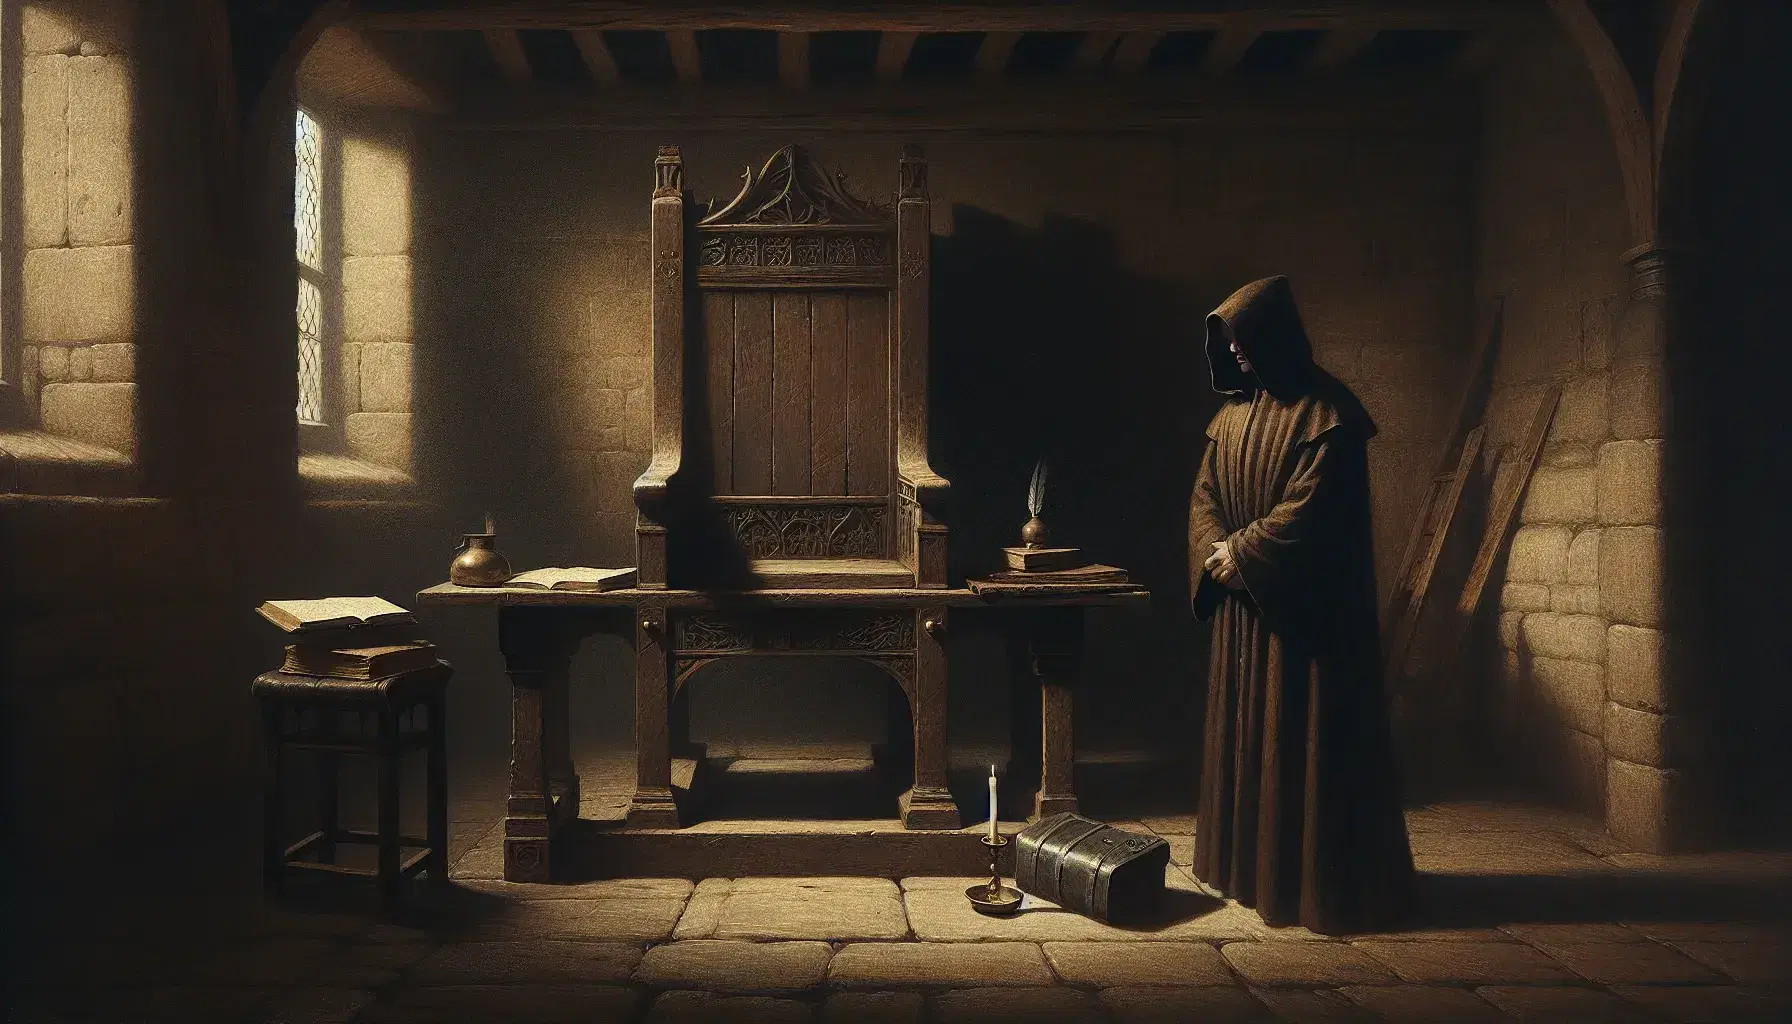 Dimly lit medieval room with stone walls, wooden throne, and table with book and inkwell; robed figure stands beside bound person in tunic.